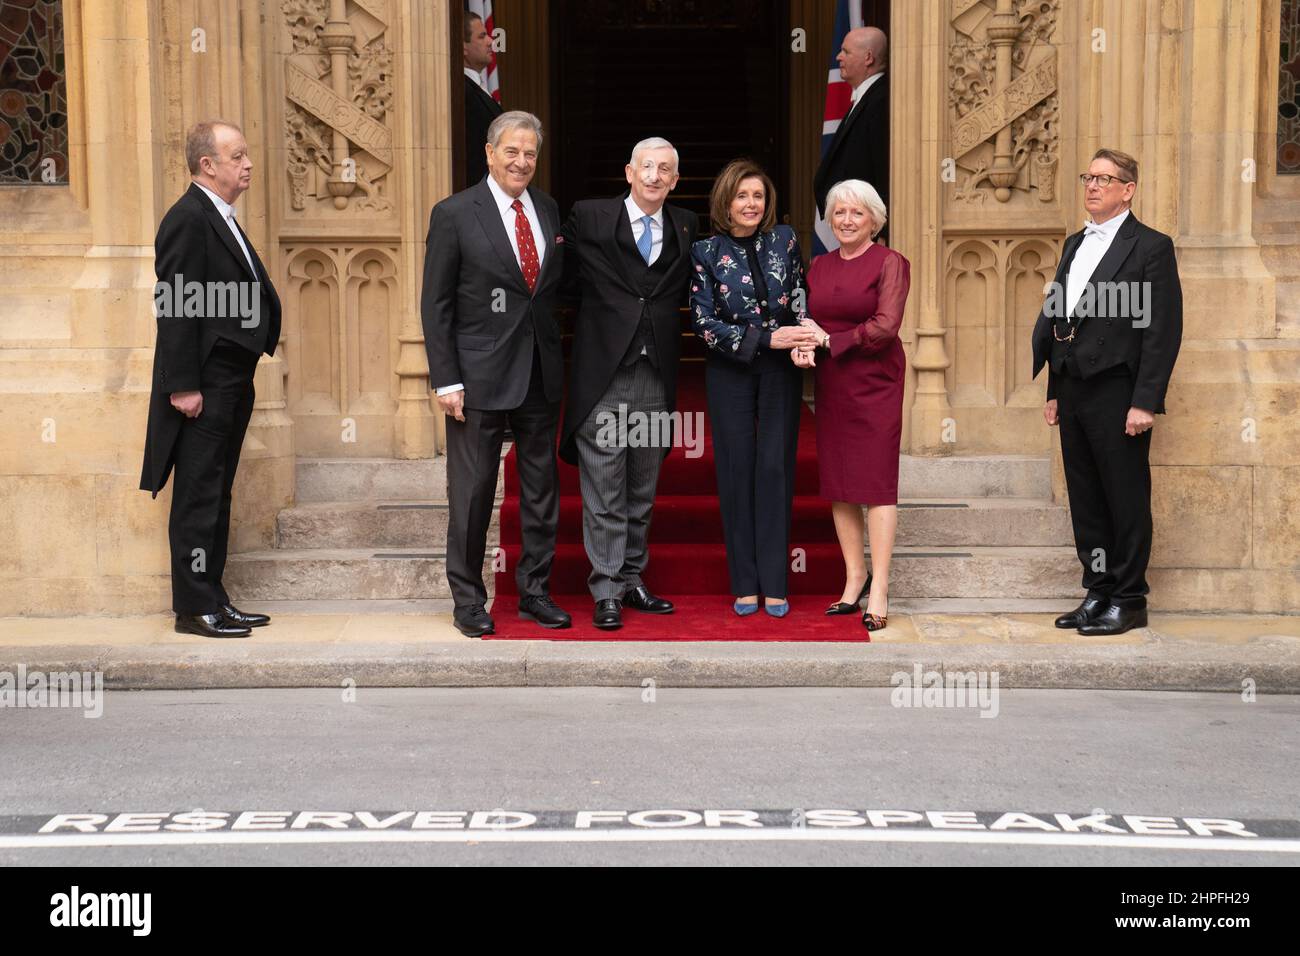 Nancy Pelosi, Speaker of the House of Representatives (third from left) and her husband, Paul Pelosi (far left) are greeted by Commons Speaker Sir Lindsay Hoyle (second from left) and his wife Catherine Swindley (far right) during a visit as their guests to the Houses of Parliament in Westminster, London. Picture date: Monday February 21, 2022. Stock Photo